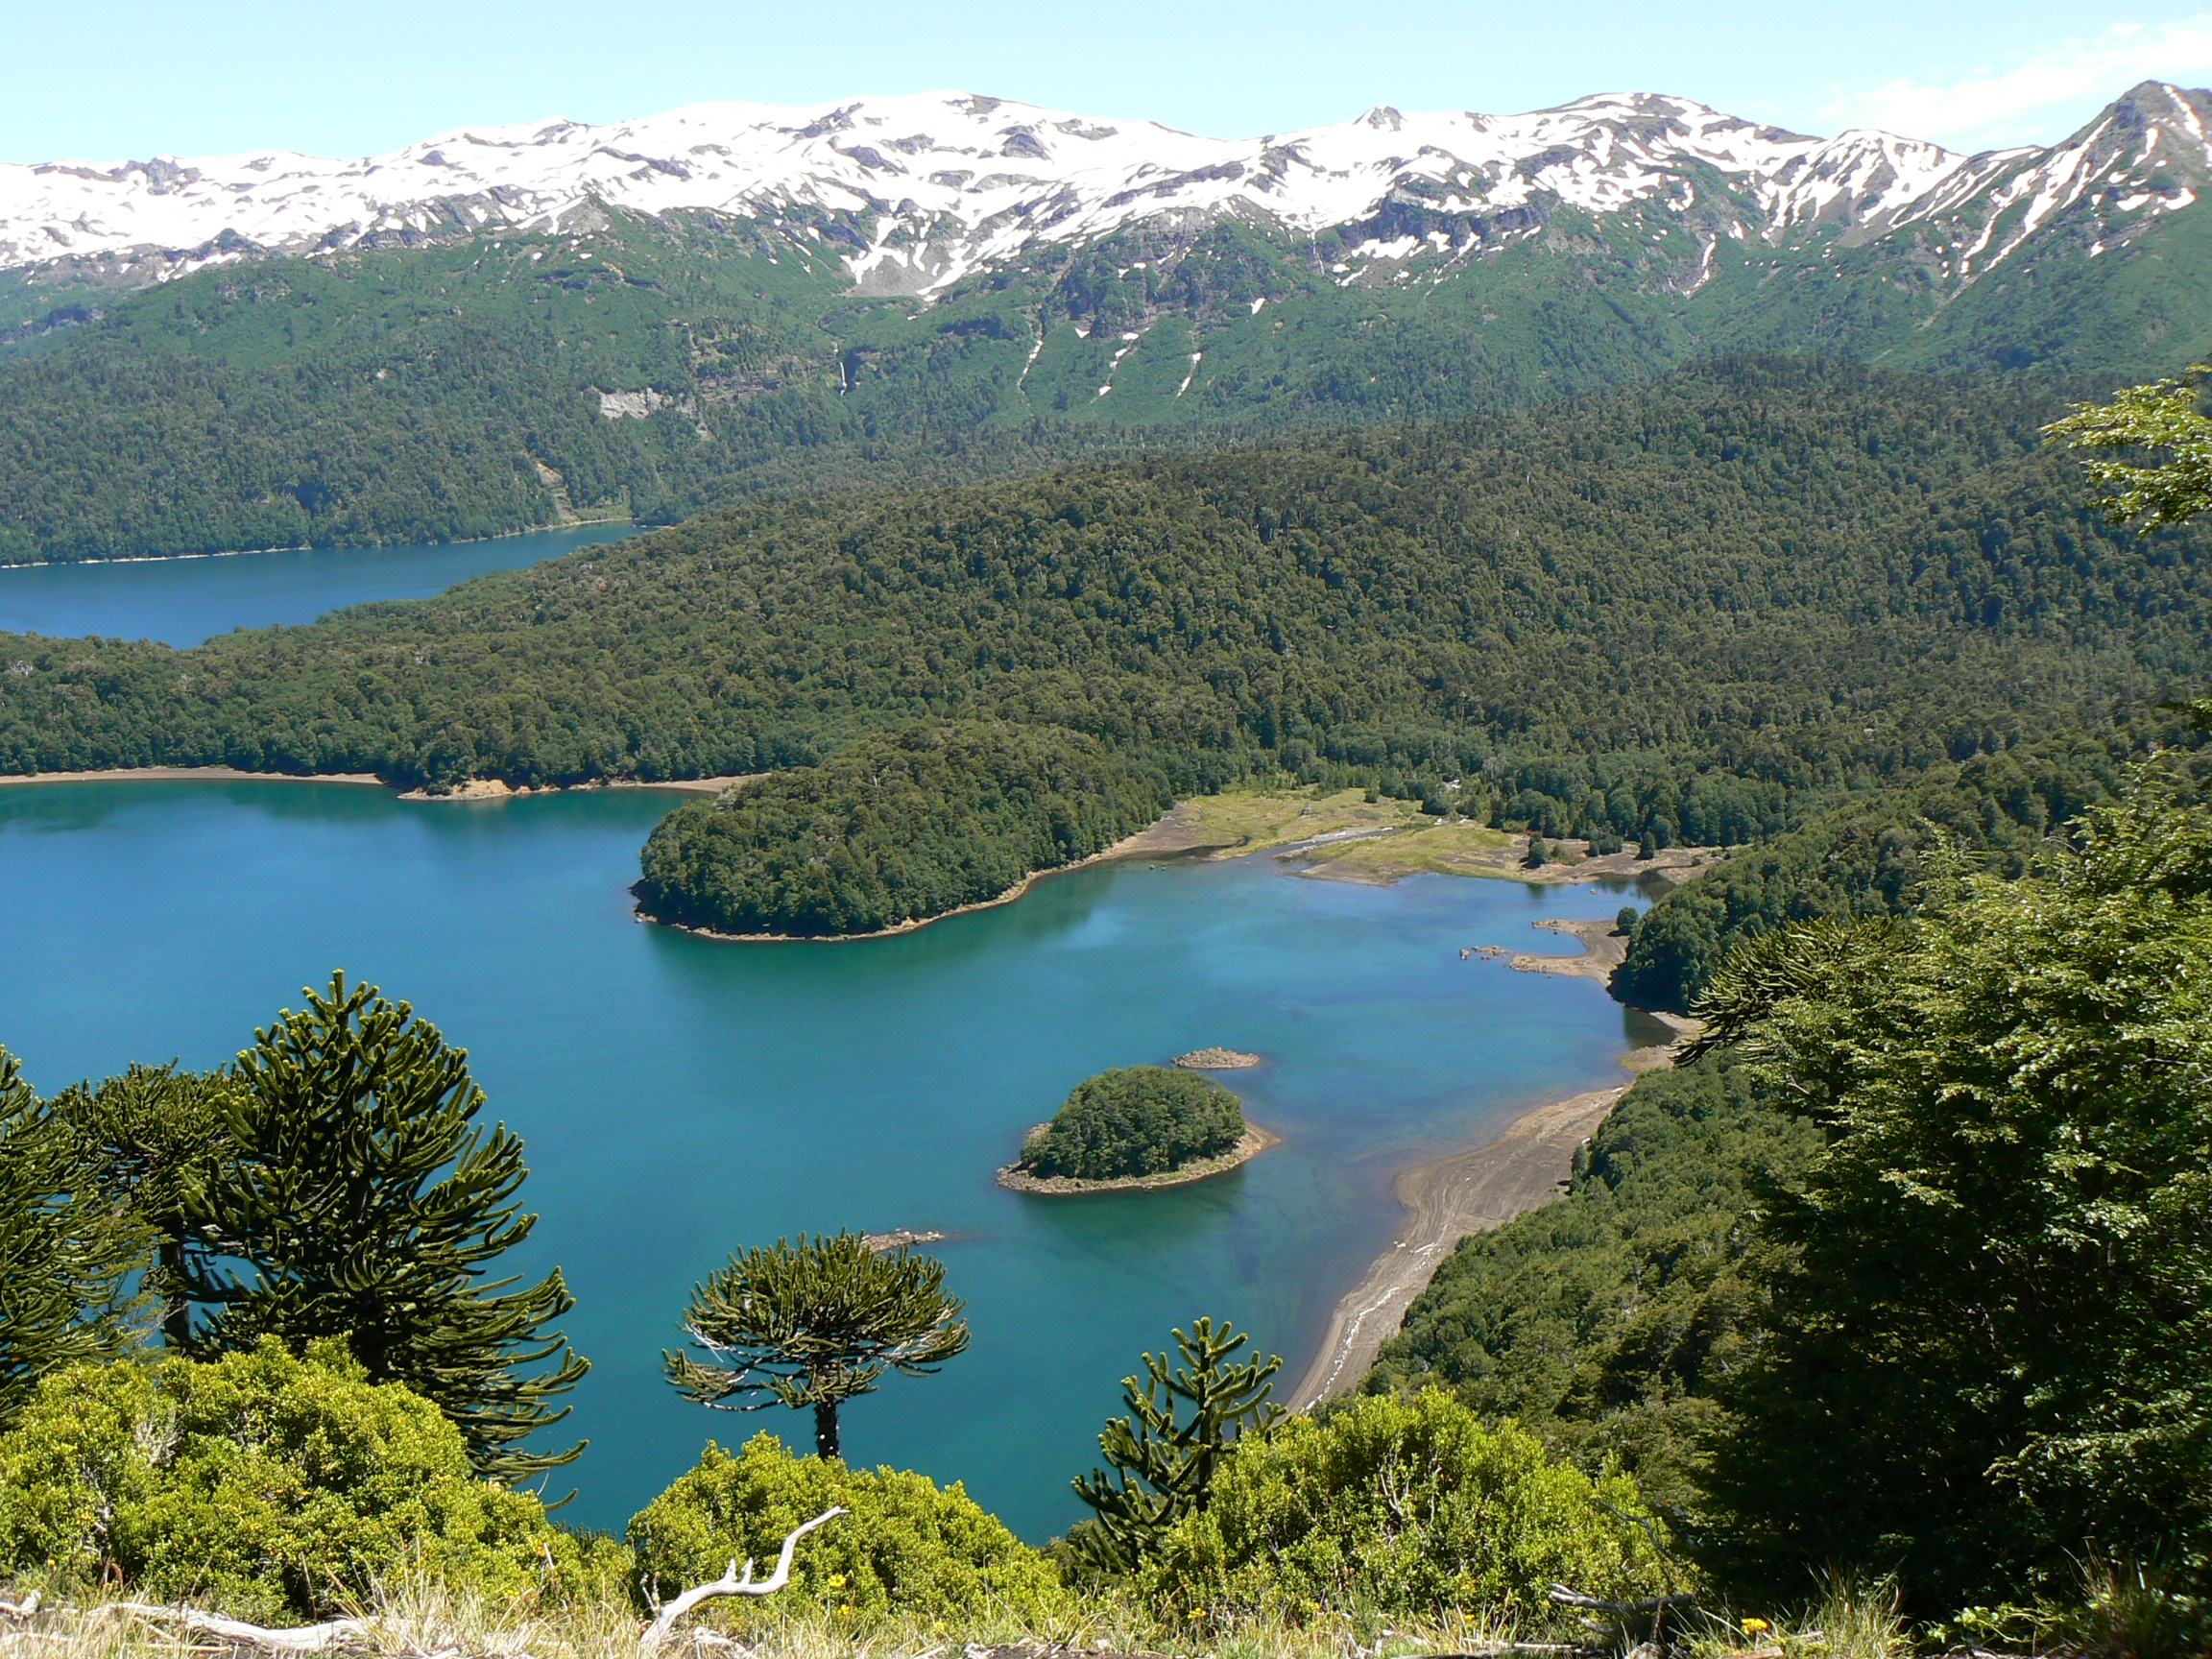 Looking out over Lago Conguillio